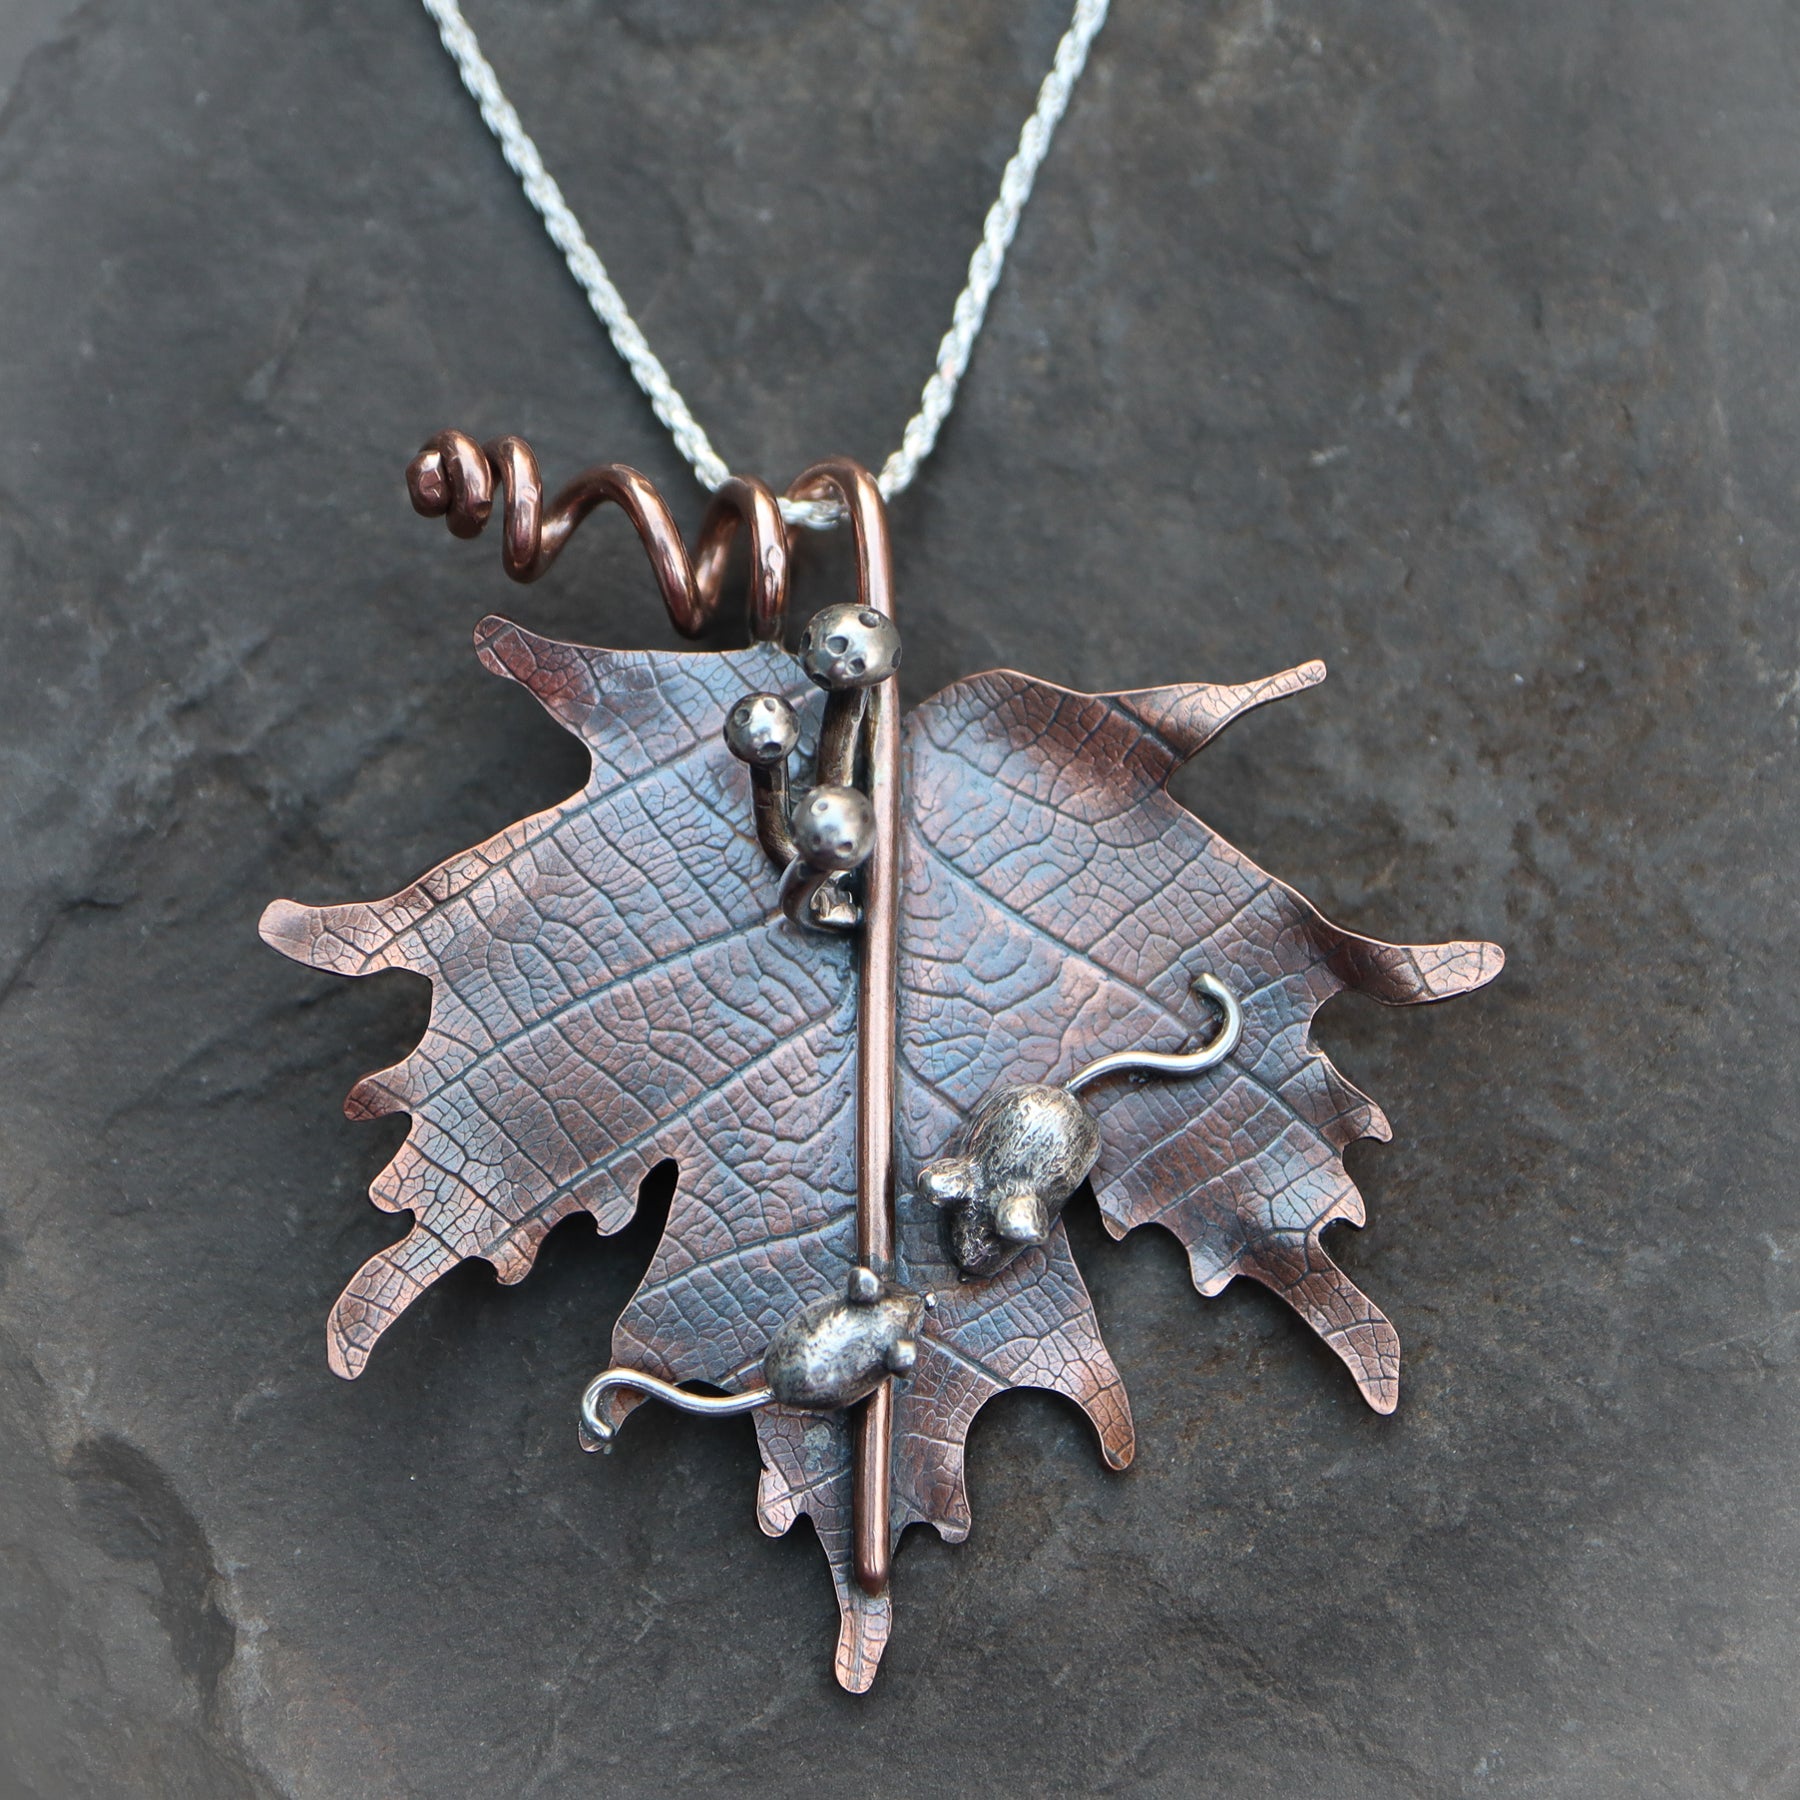 A copper maple leaf that is about 2 inches tall and 2 inches wide. On the leaf are two hand carved sterling silver mice, a mother and a baby, snuggled next to each other. Above the mice are three silver mushrooms coming from the stem of the maple leaf. The necklace is shown in a dark grey piece of slate. 